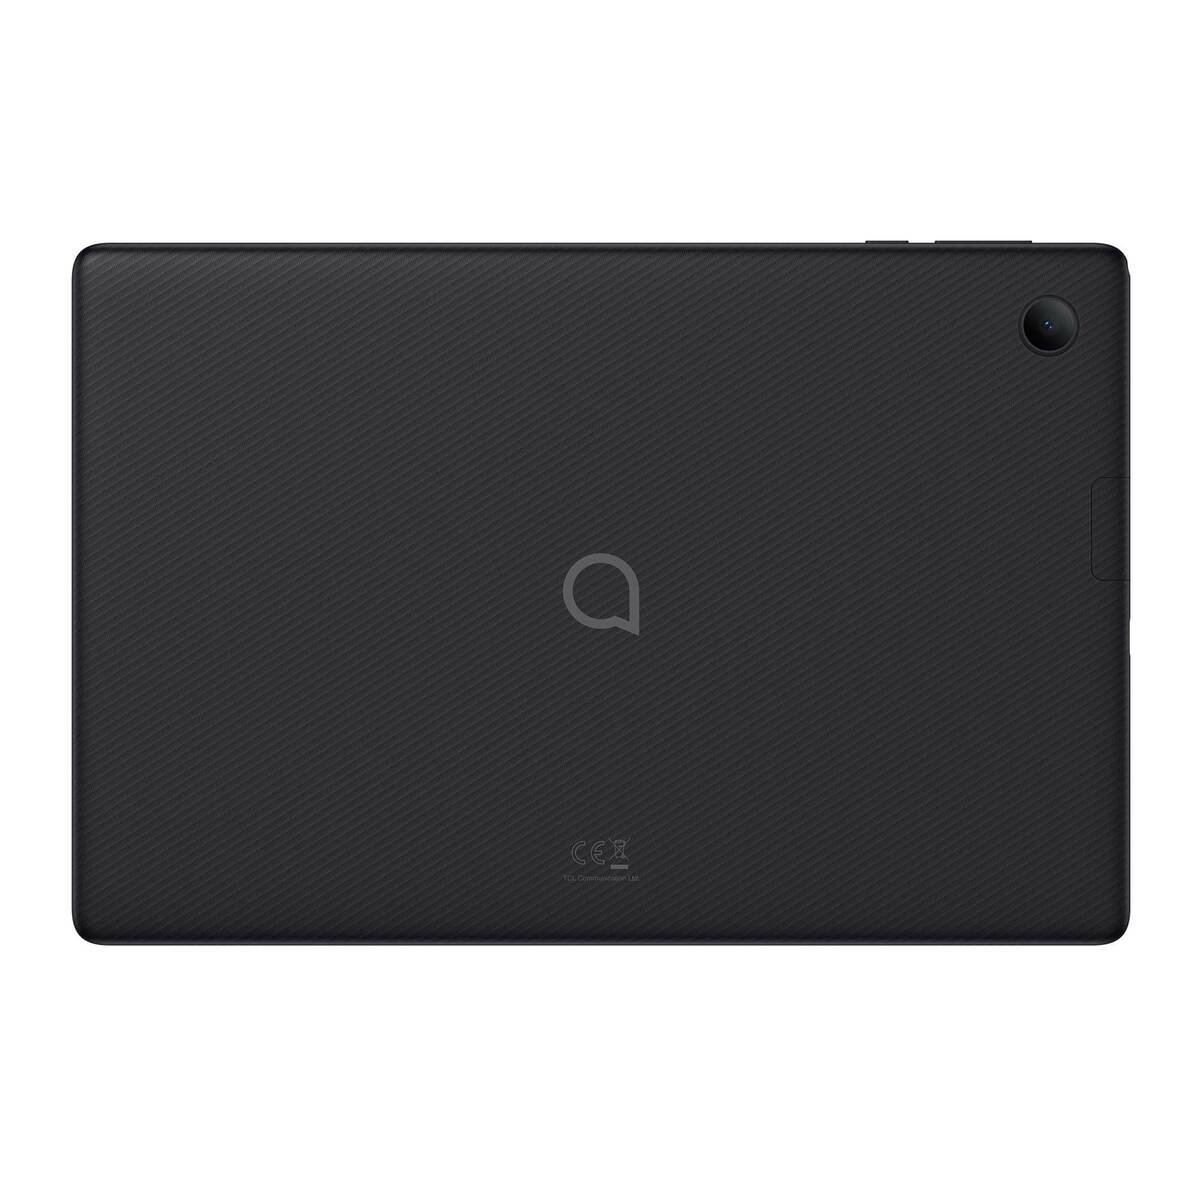 Alcatel Tablet 1T 10 8091, WiFi, Quad-core, 1GB RAM, 16GB Memory, 10 inches Display, Android, Black